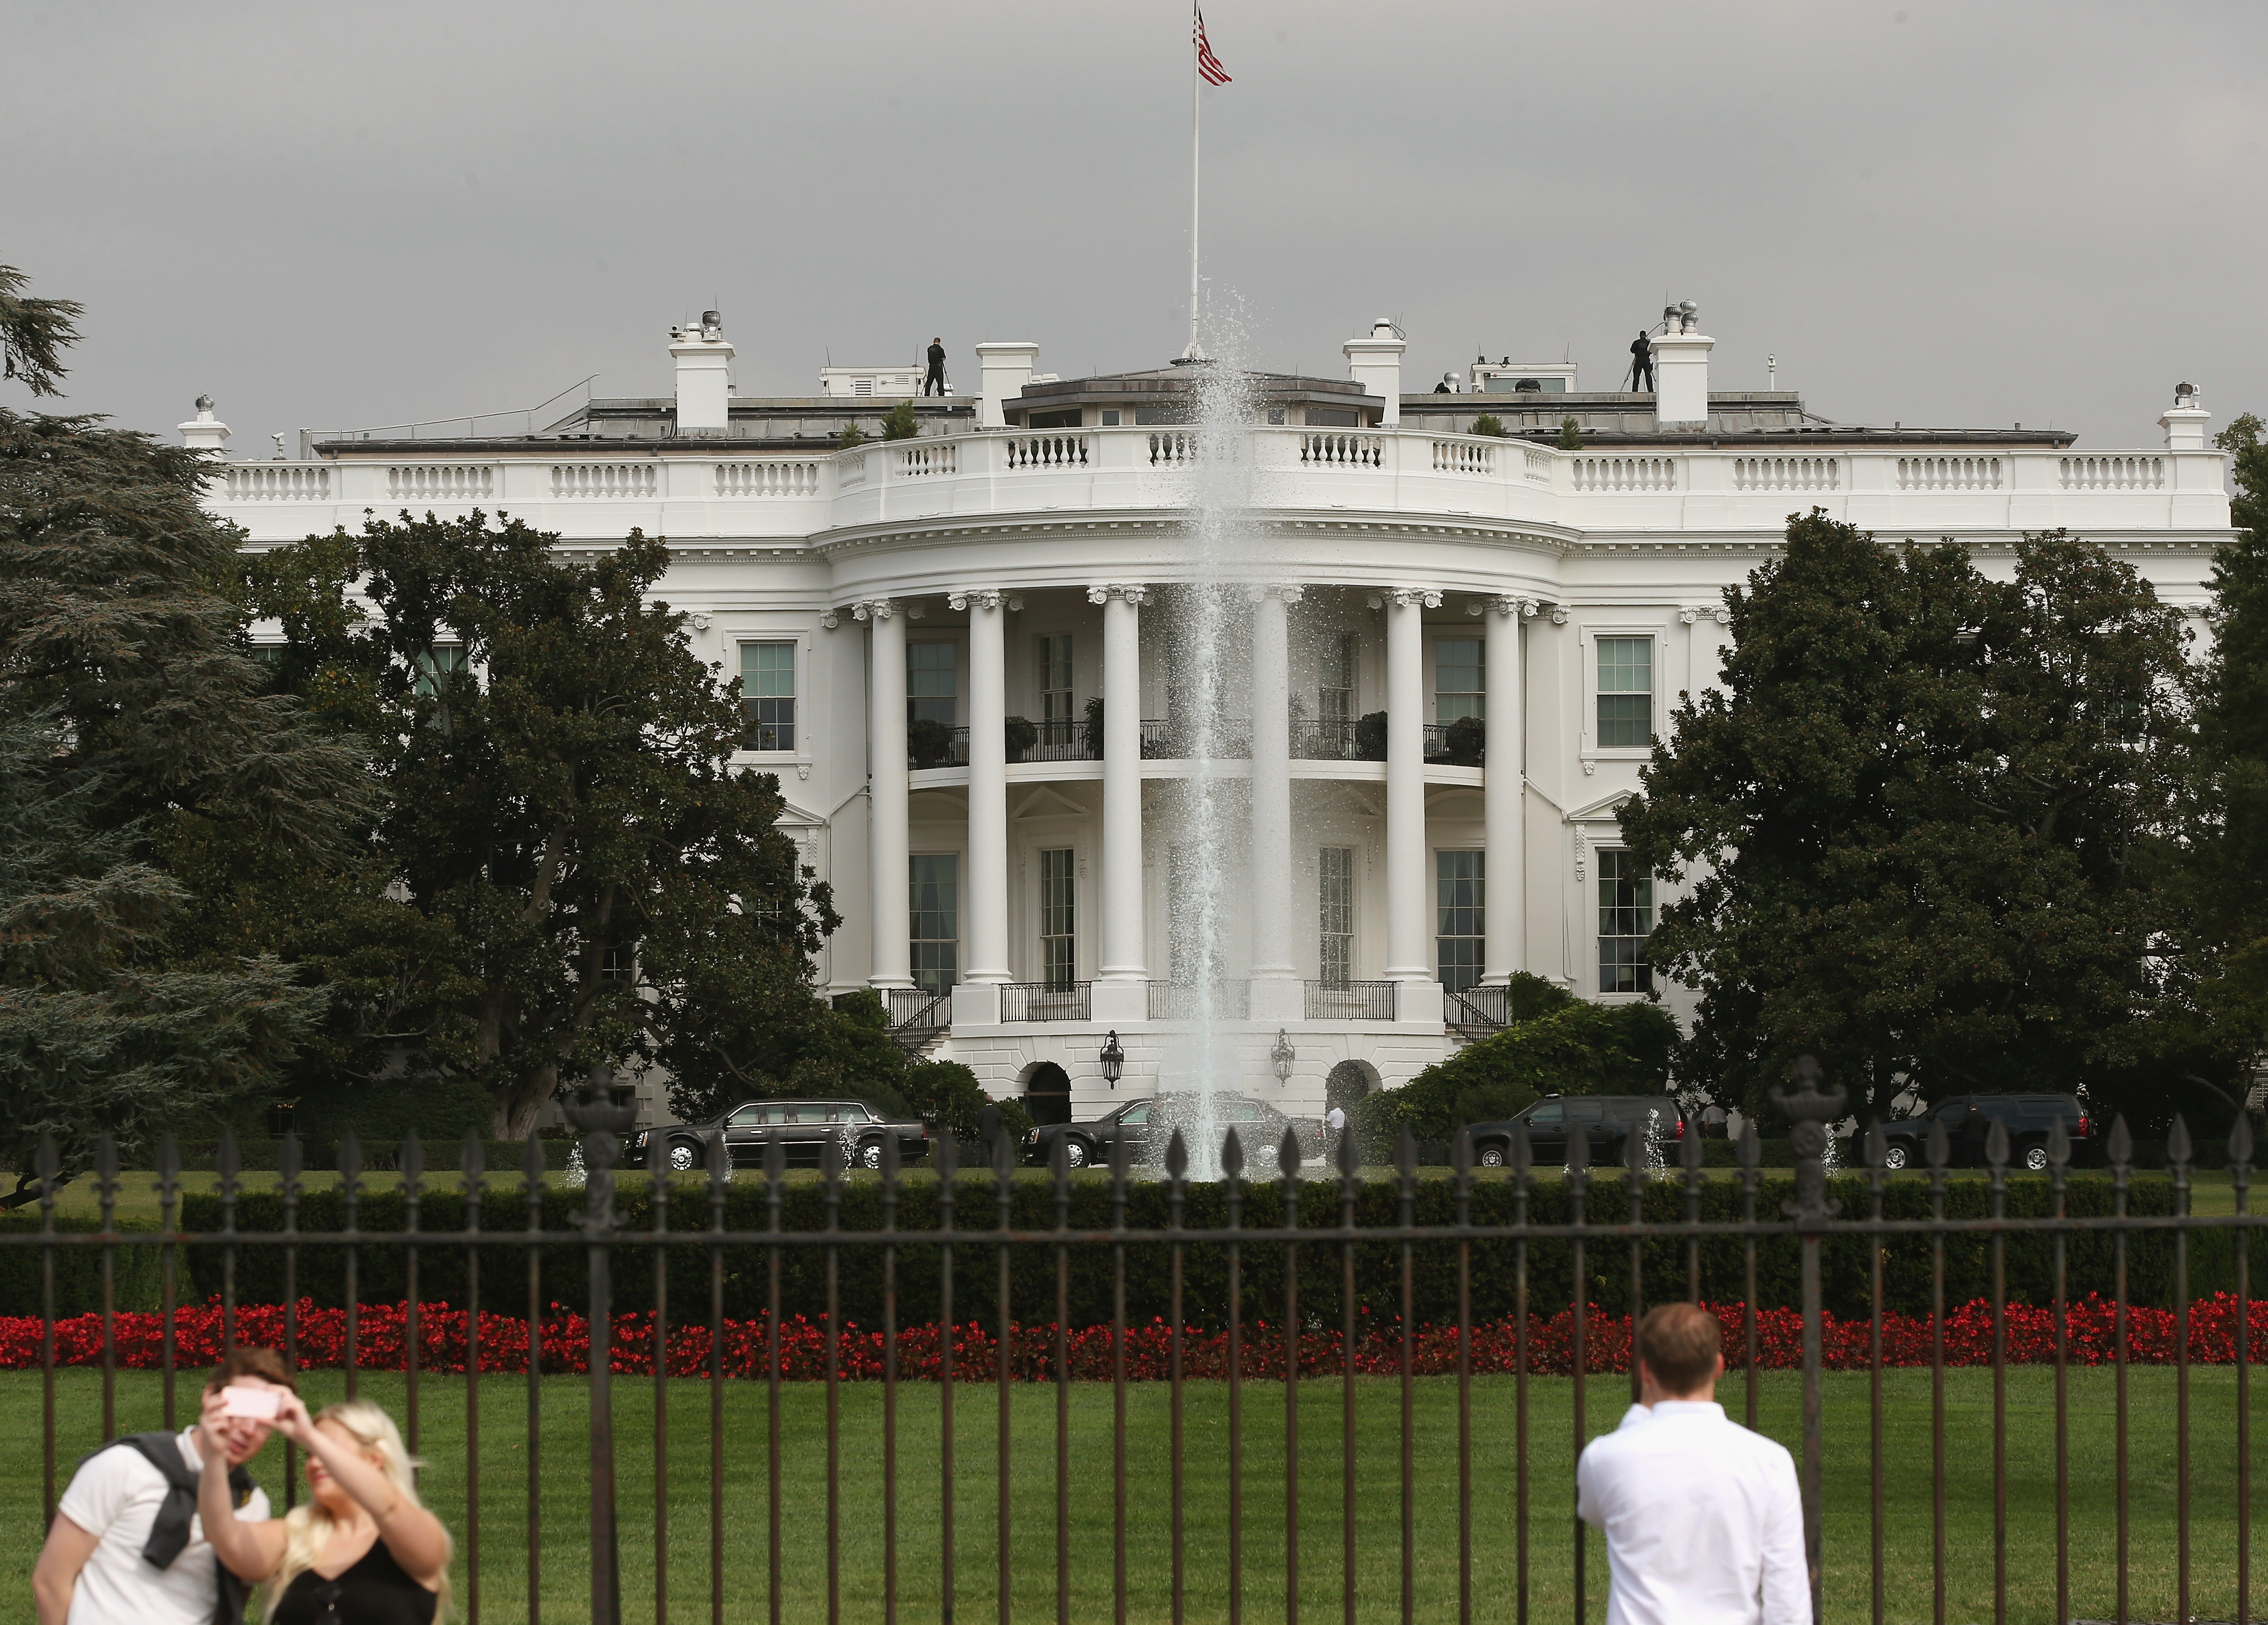 Tourists visit the south side of the White House on Sept. 30, 2014 in Washington. (Mark Wilson—Getty Images)